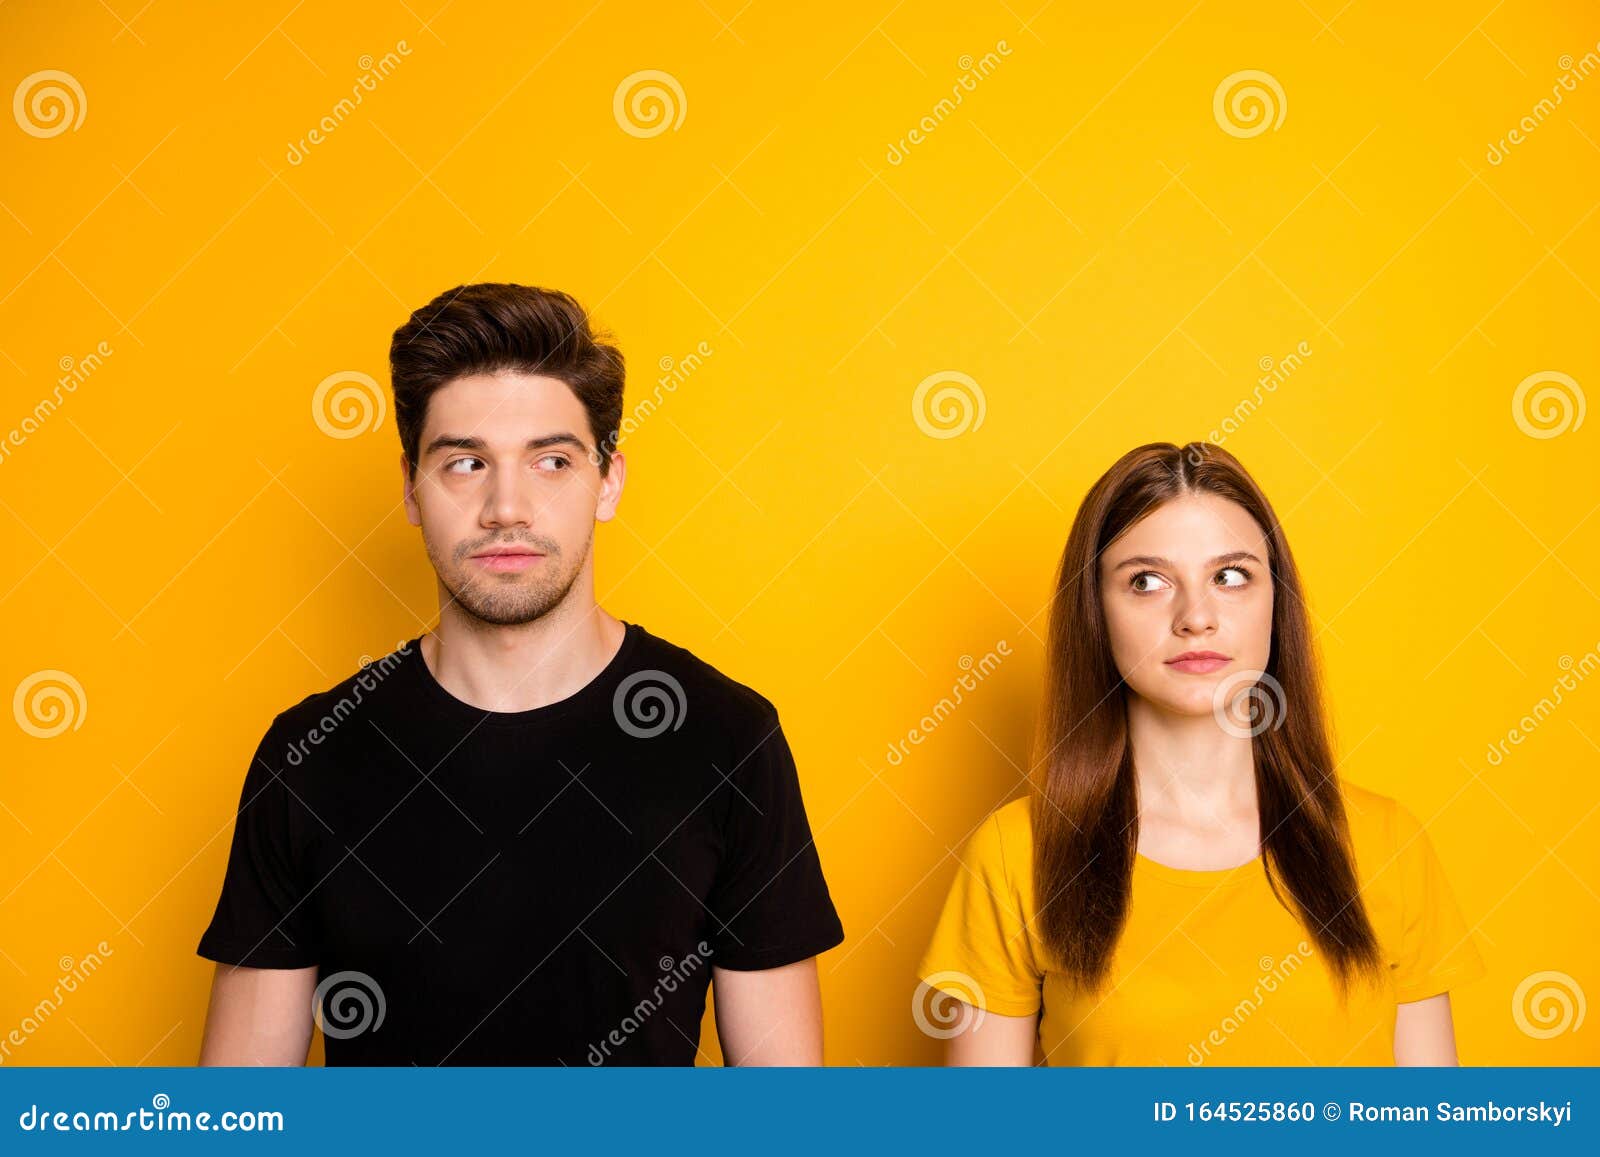 photo of suspicious thinking pondering couple uncertain about each other looking suspiciously suspecting  over